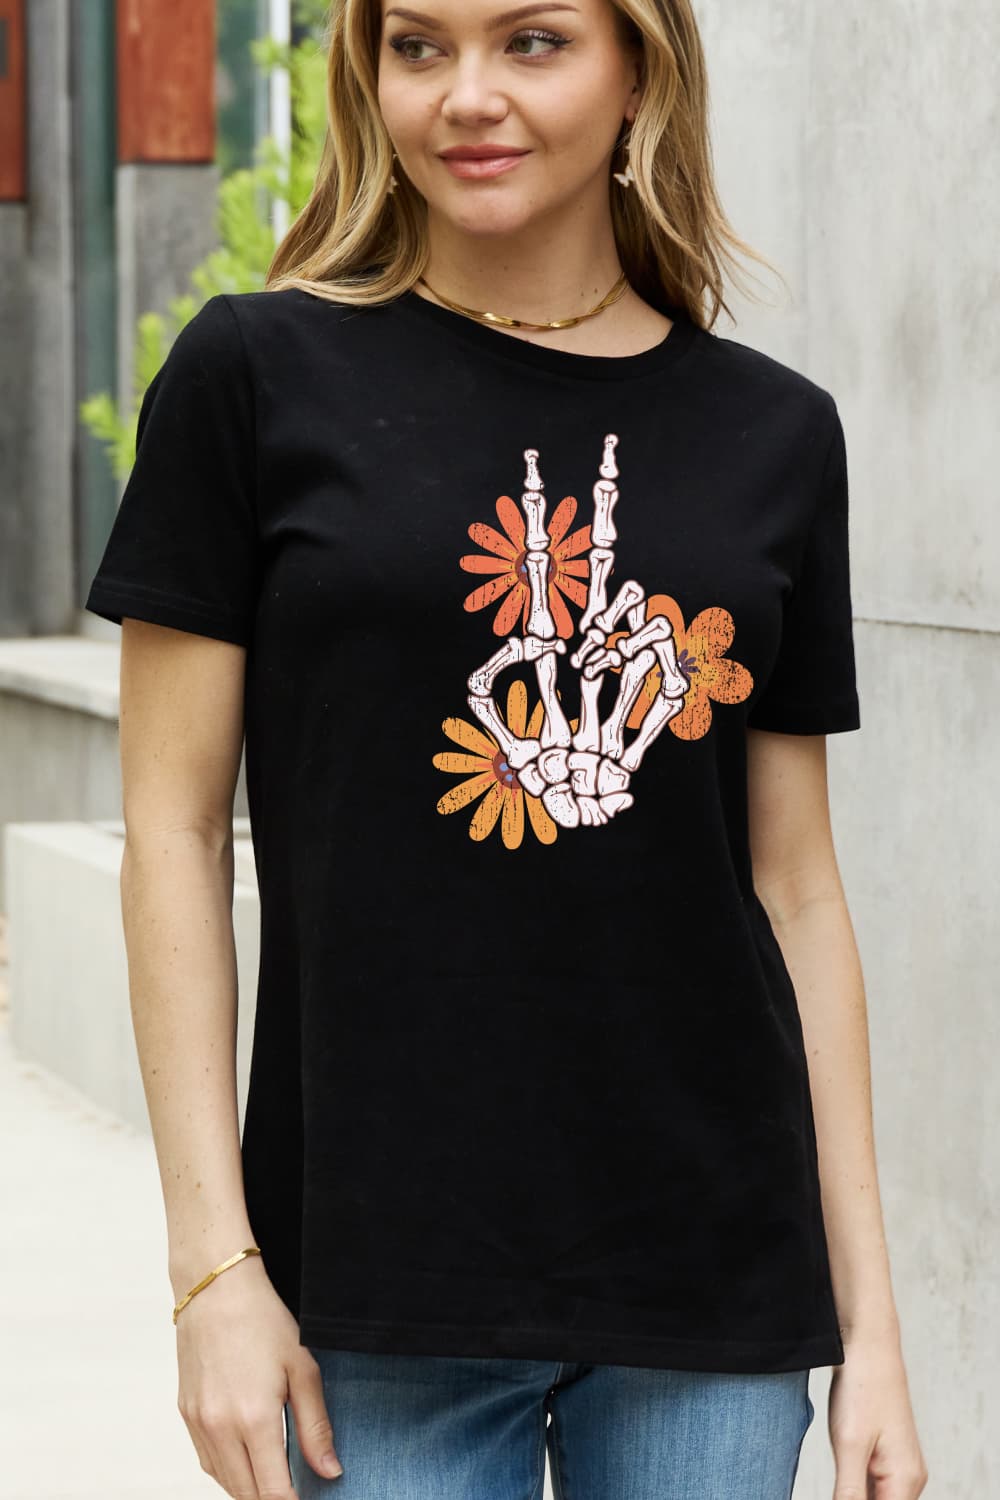 Simply Love Skeleton Hand Graphic Cotton Tee